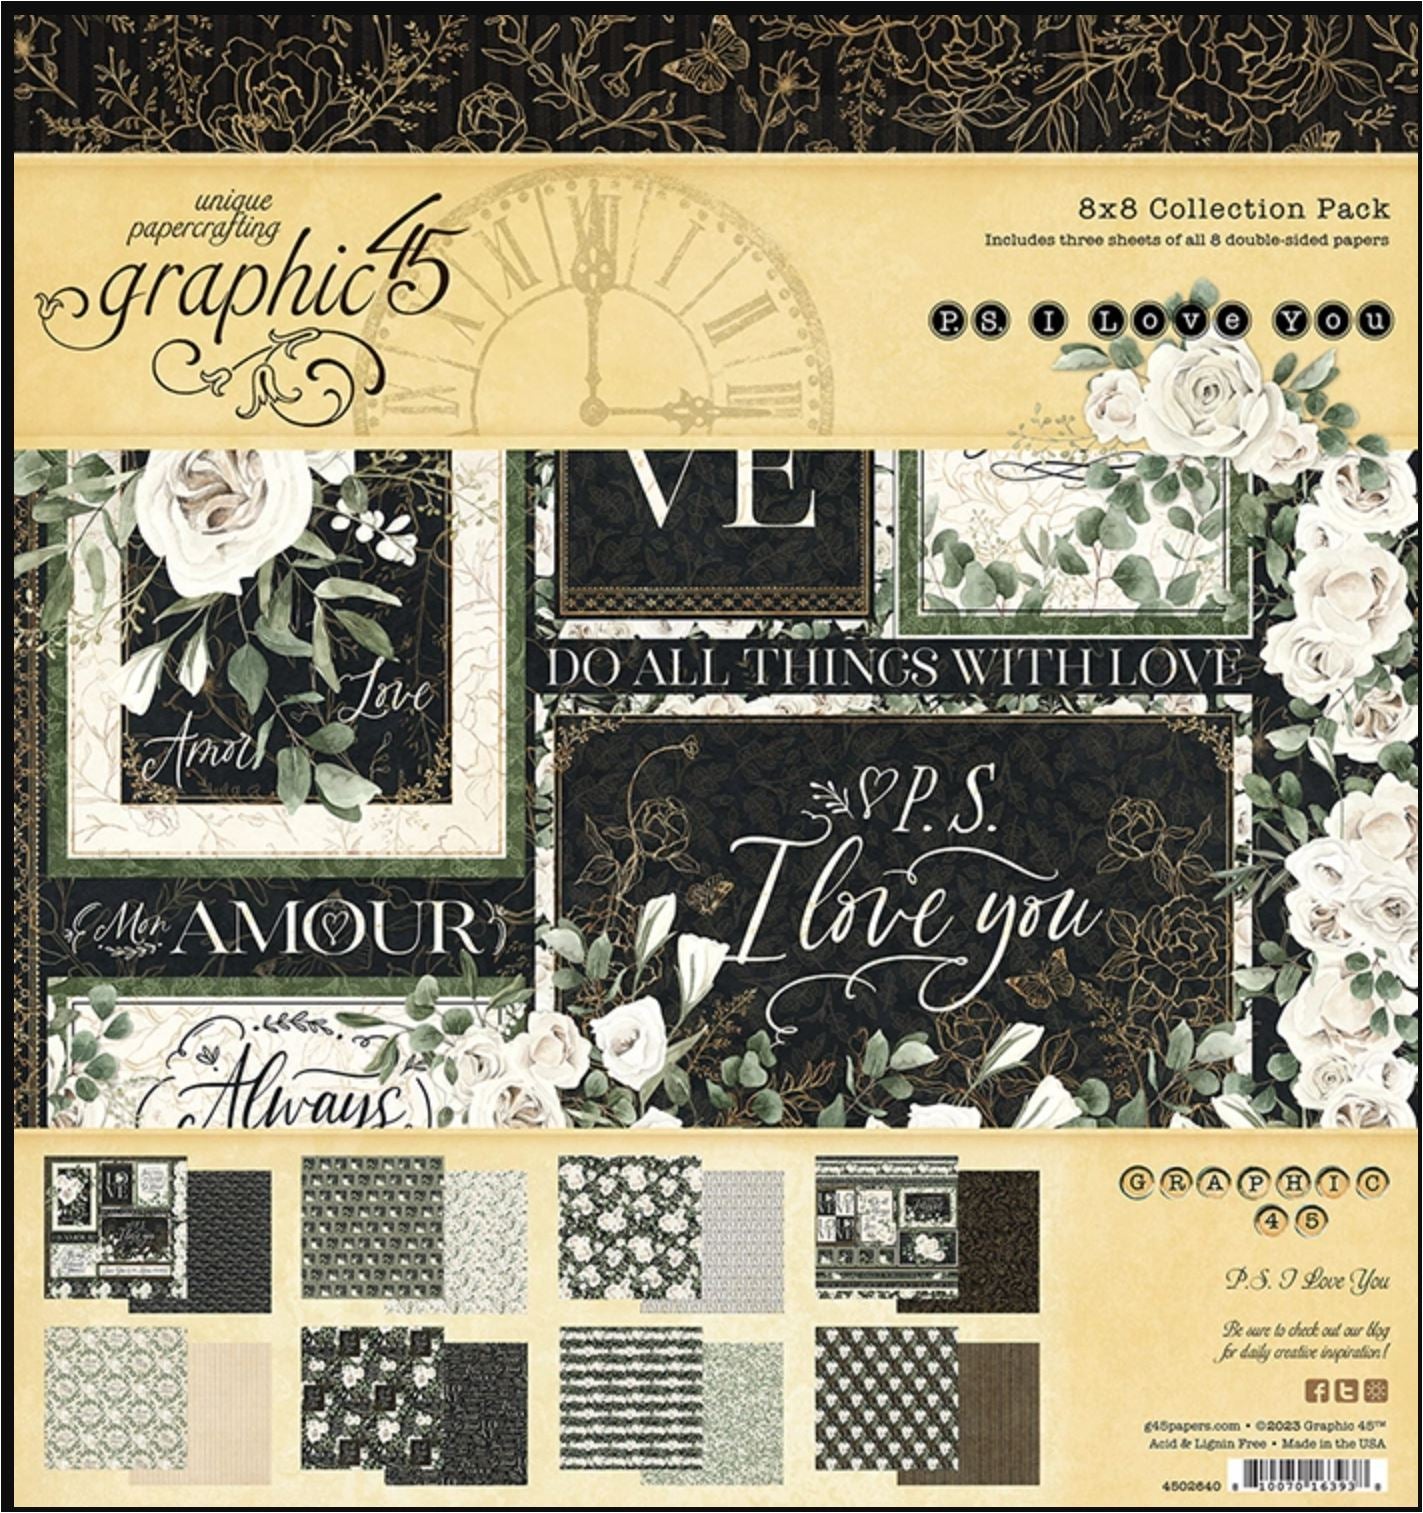 Graphic 45 * P.S. I Love You * 8x8 double sided scrapbooking paper